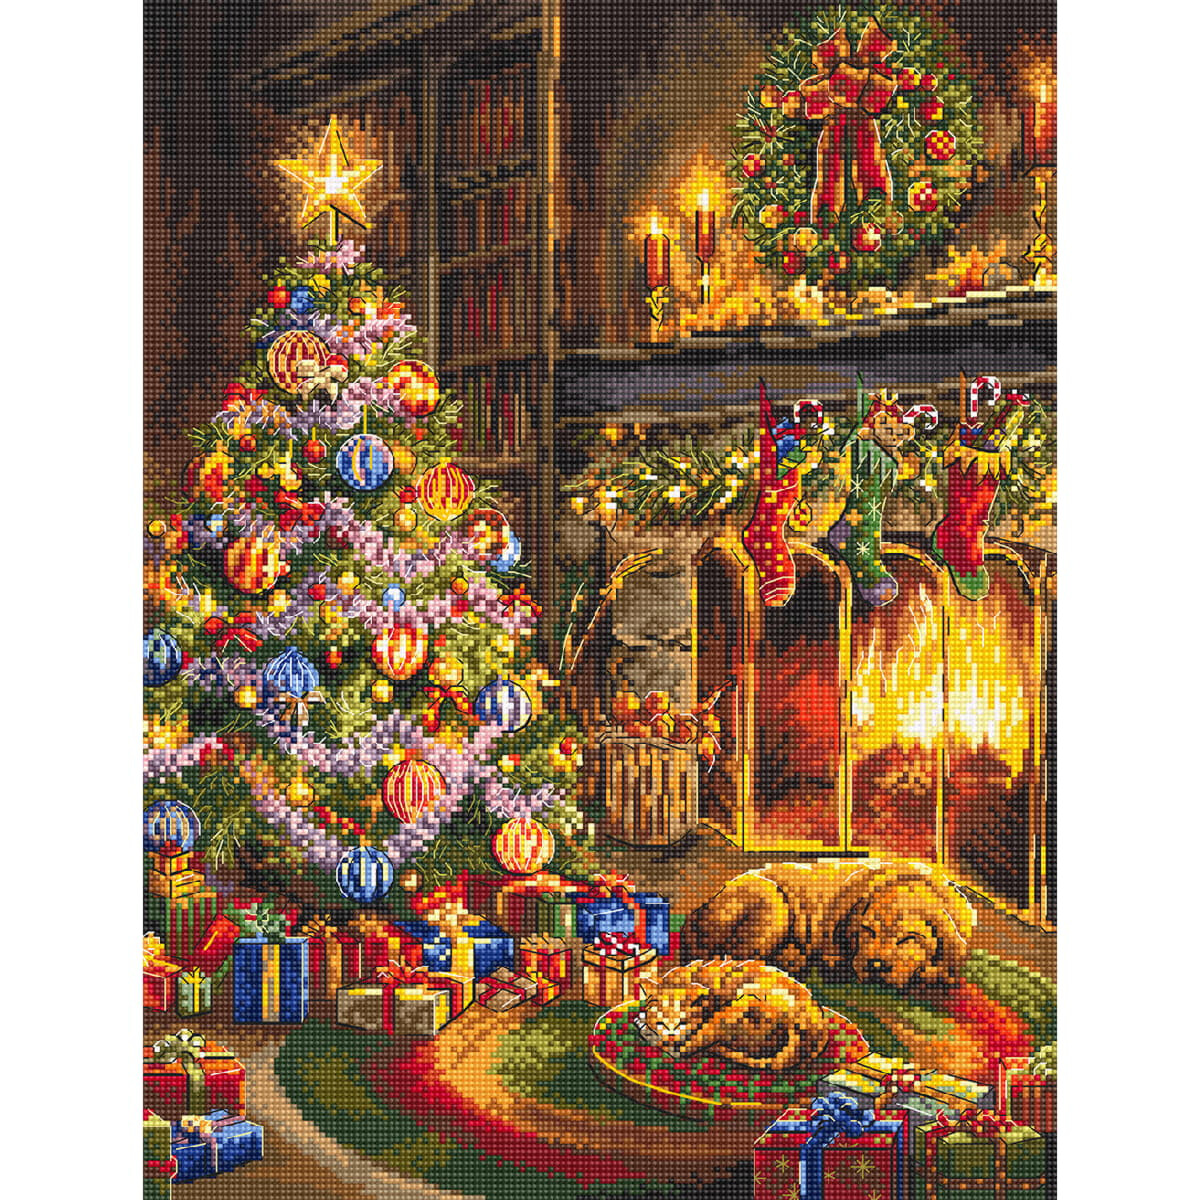 Letistitch counted cross stitch kit "Christmass...